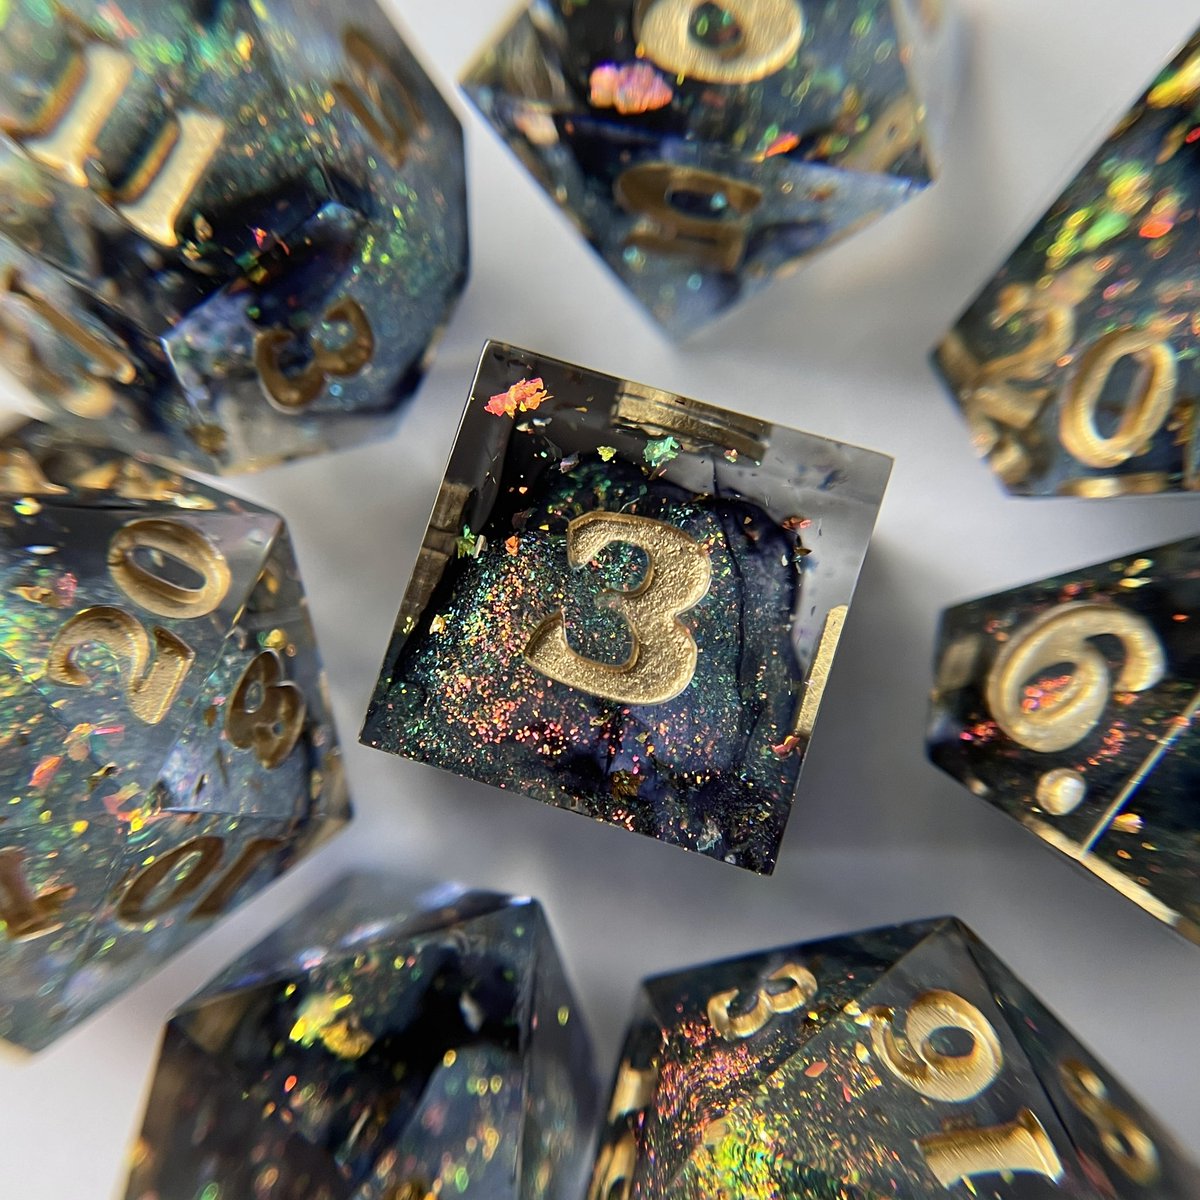 just gonna leave this here 👀

#DungeonandDragons #ttrpg #dice #handmadedice